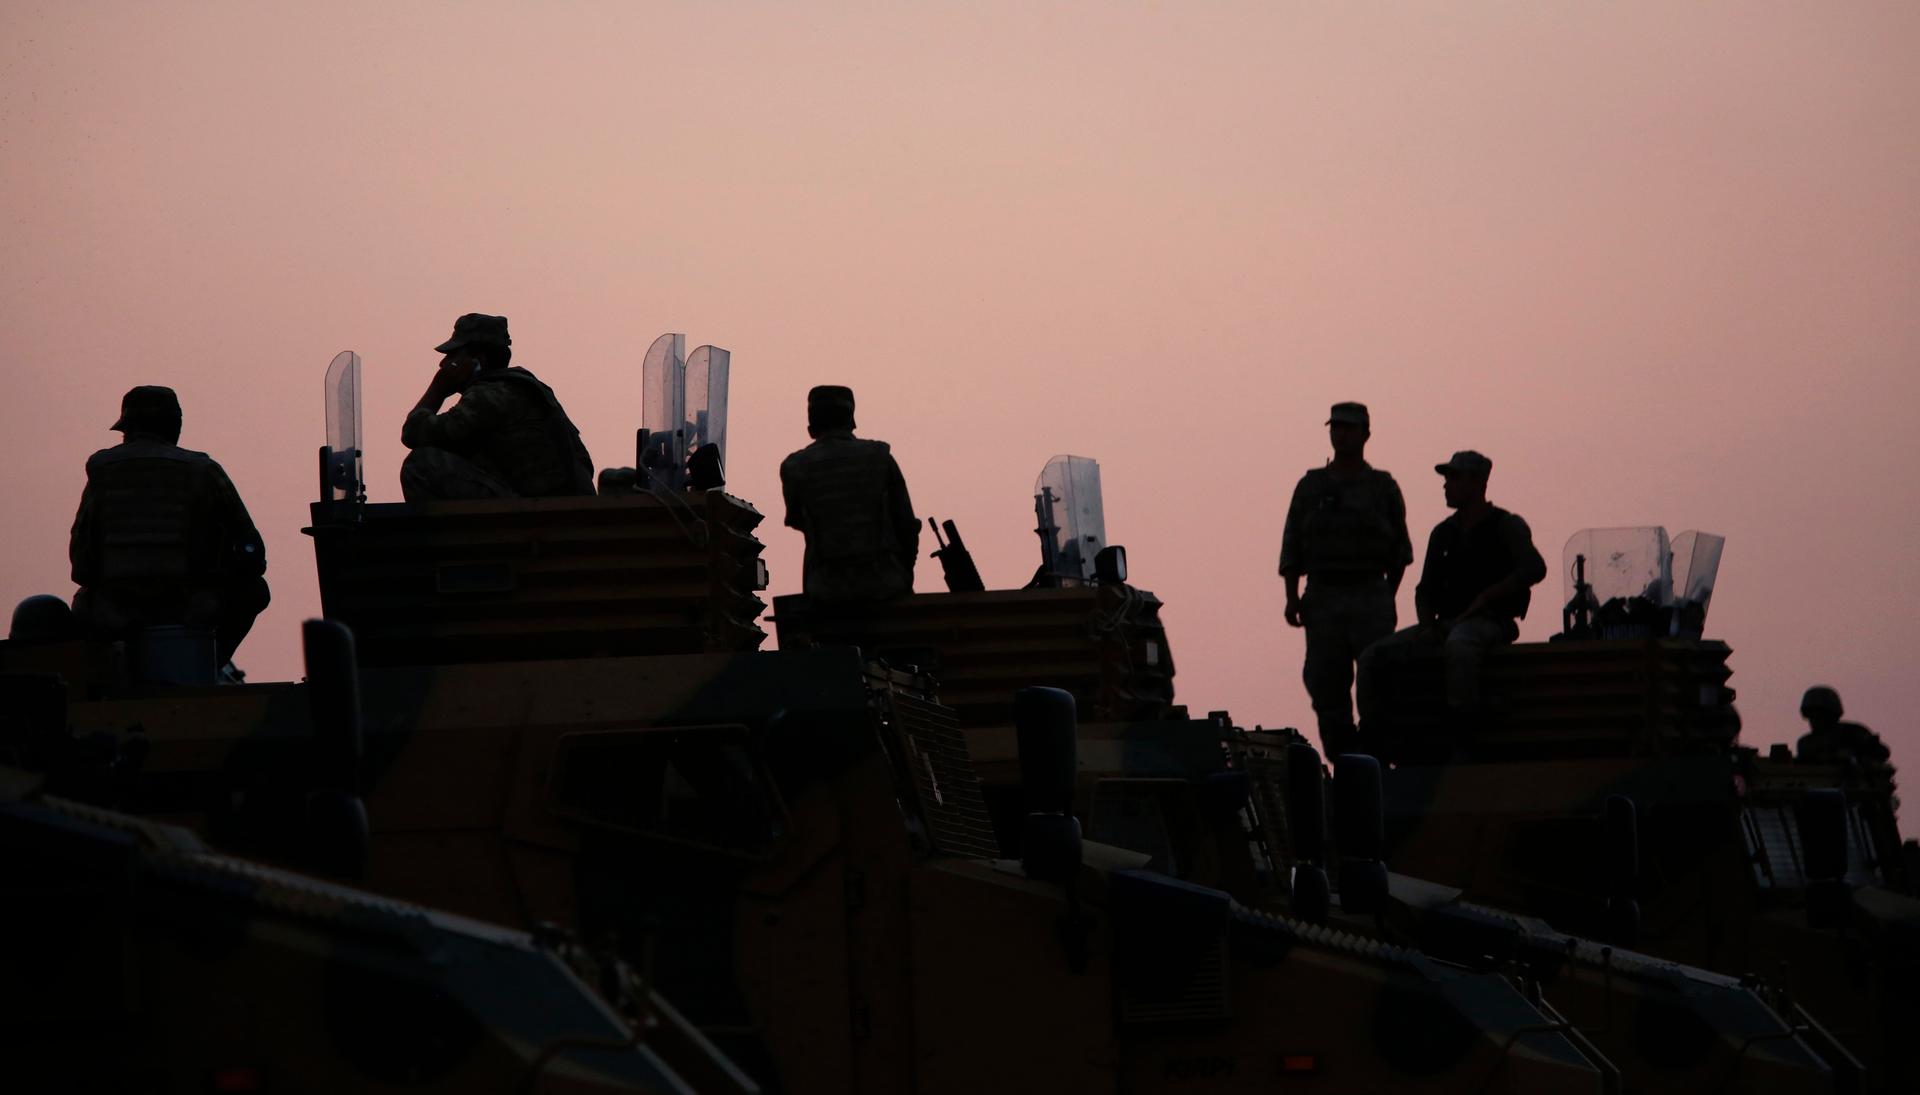 Turkish soldiers are silhouetted atop armoured vehicles near the Mursitpinar border crossing on the Turkish-Syrian border on October 3, 2014.